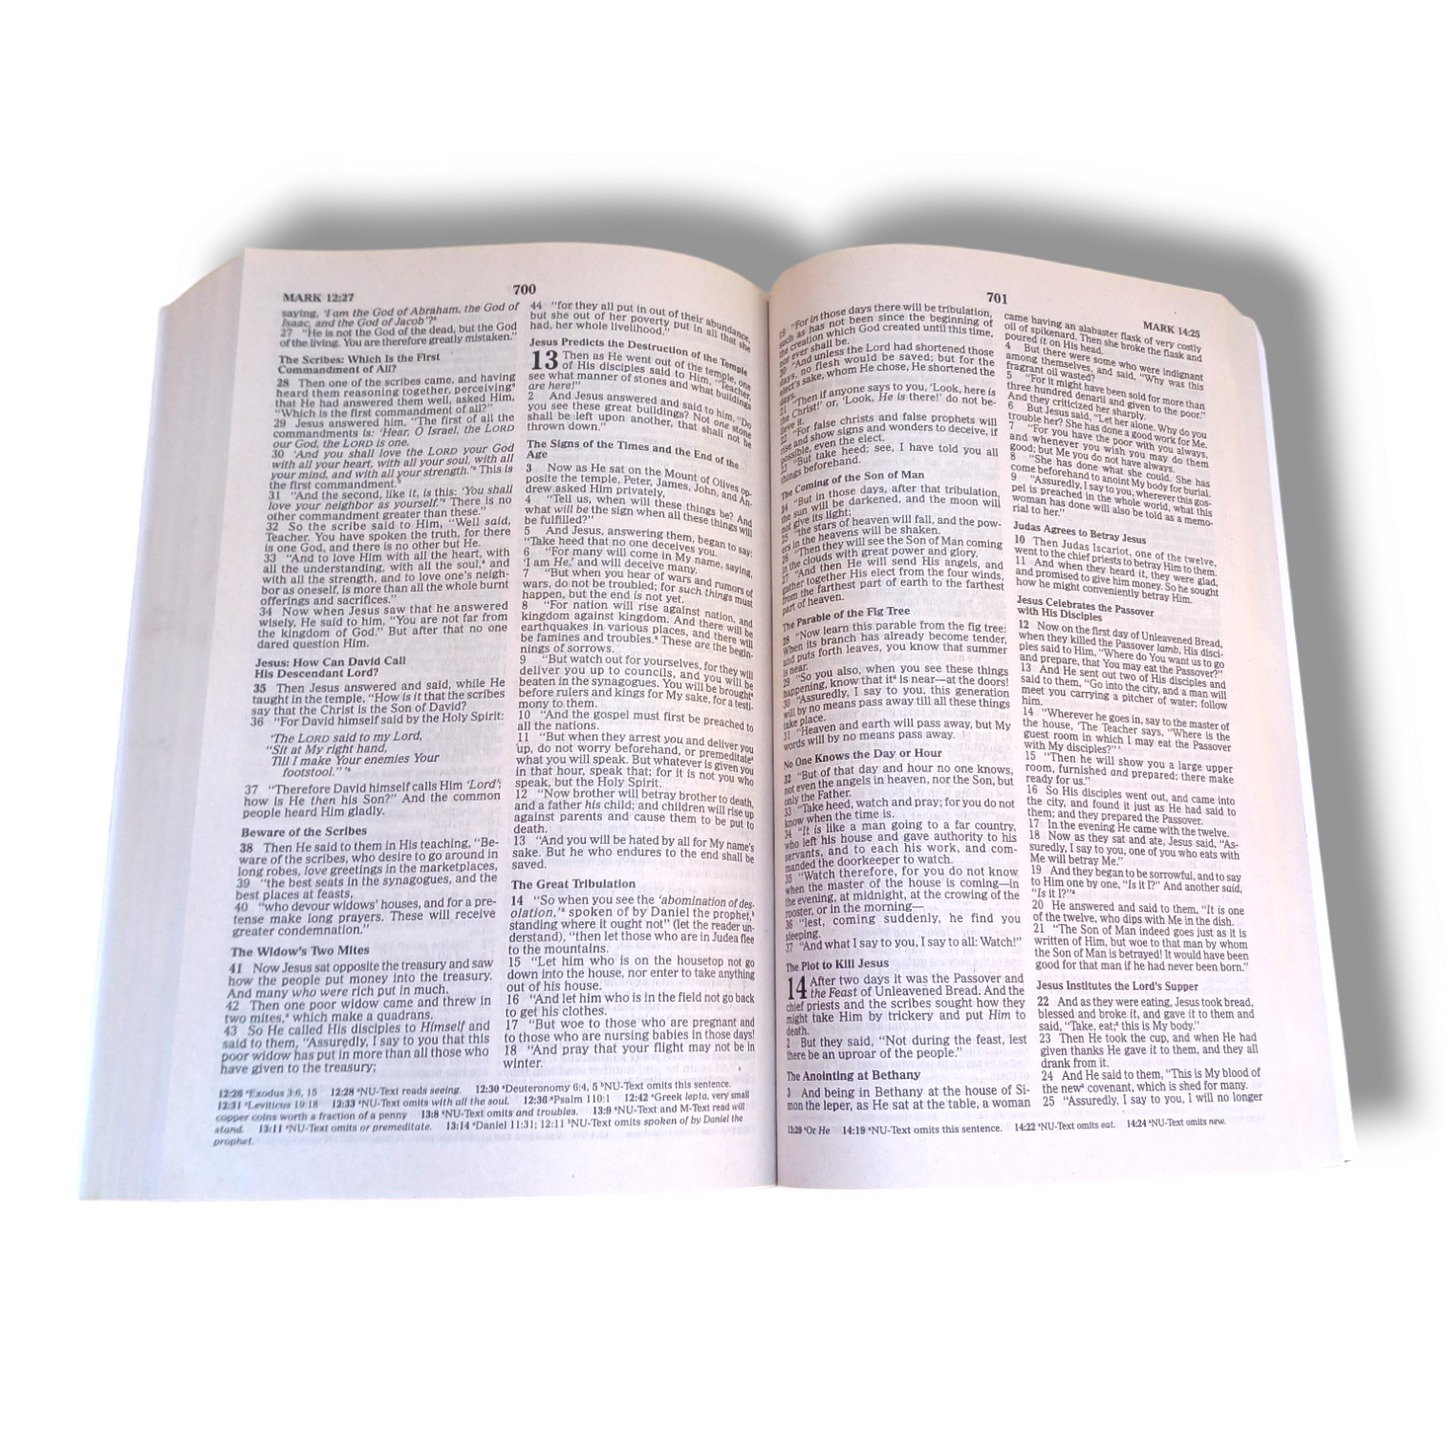 NKJV Value Outreach Bible | Paper Bound Edition | Holy Bible In New King James Version | New Edition